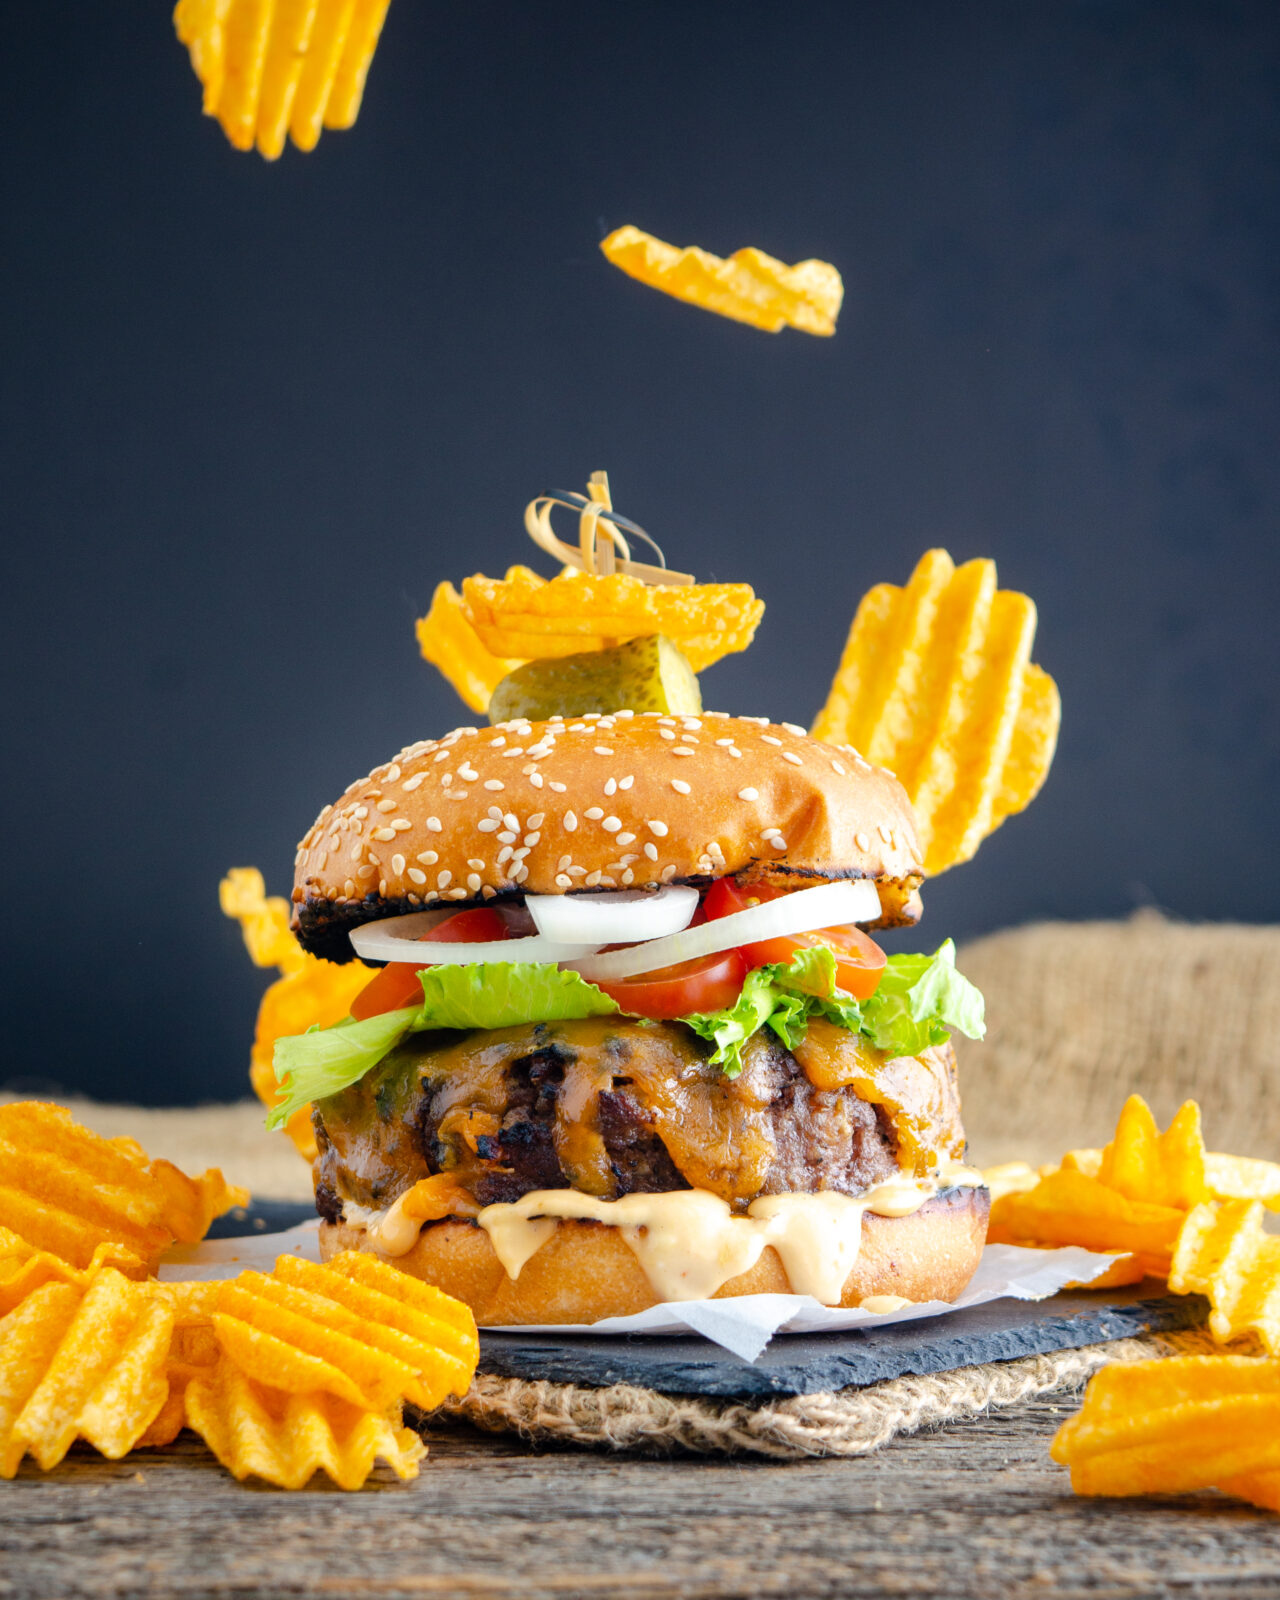 Food photography of a Fully loaded burger garnished with chips